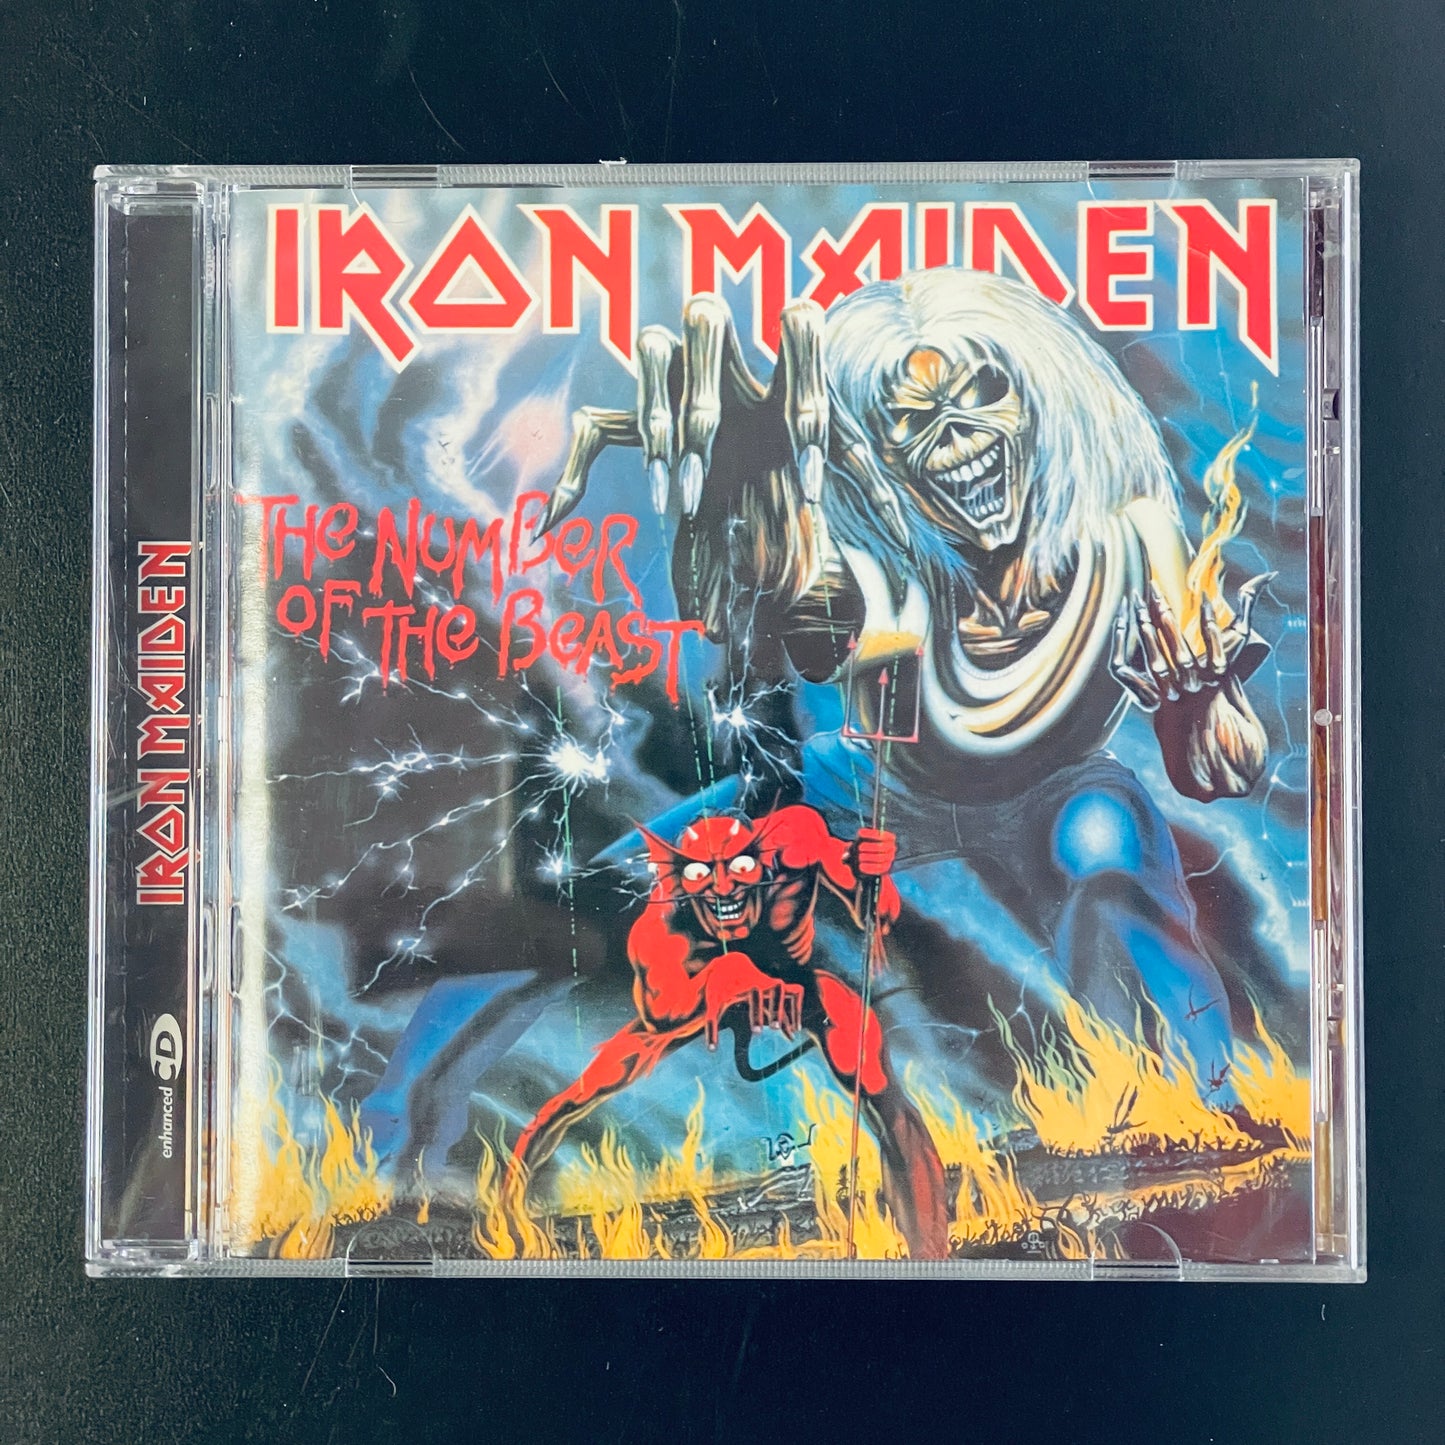 Iron Maiden - The Number of the Beast CD (used)